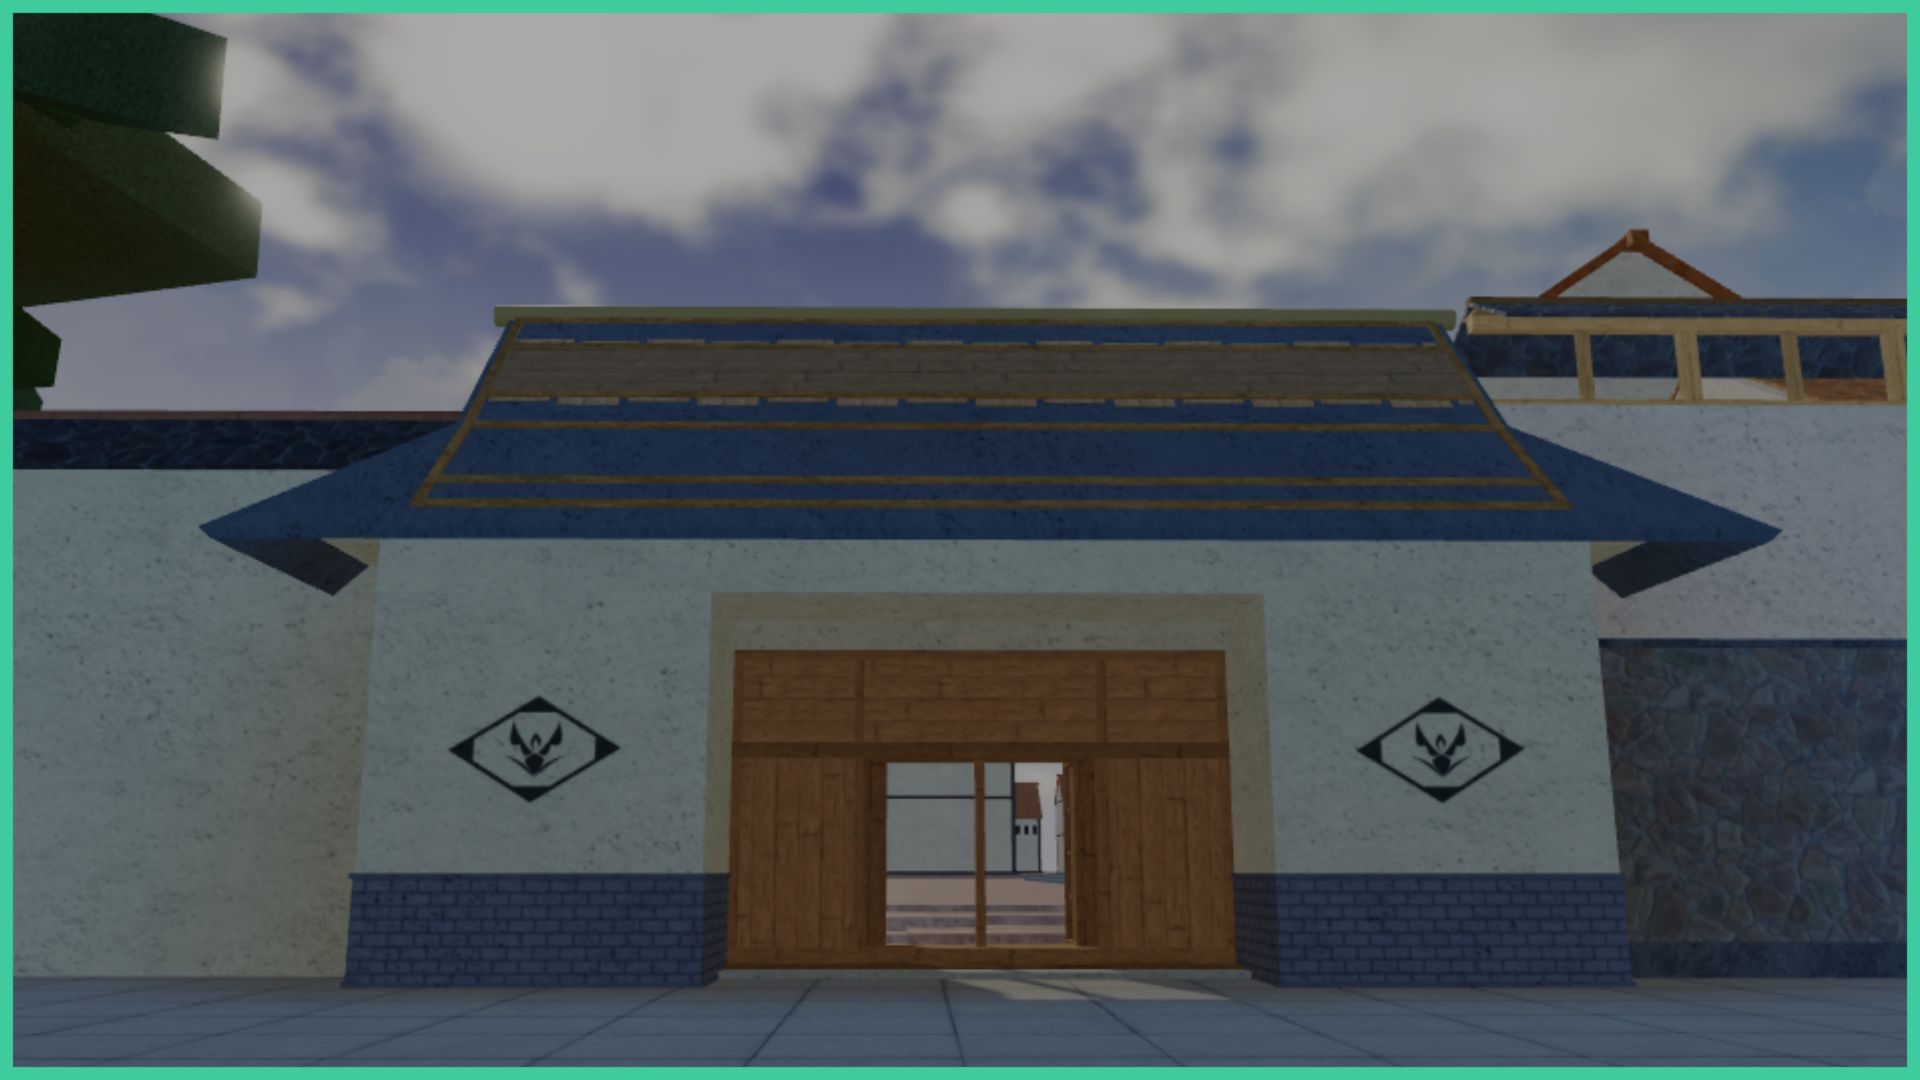 feature image for our type soul race tier list, the screenshot is of a doorway with traditional roofing, there is a wall separating the two areas of the town, with the gateway entrance having a wooden doorway, the sun is setting in the sky with clouds floating around, and the top of a tree to the left of the doorway behind the wall